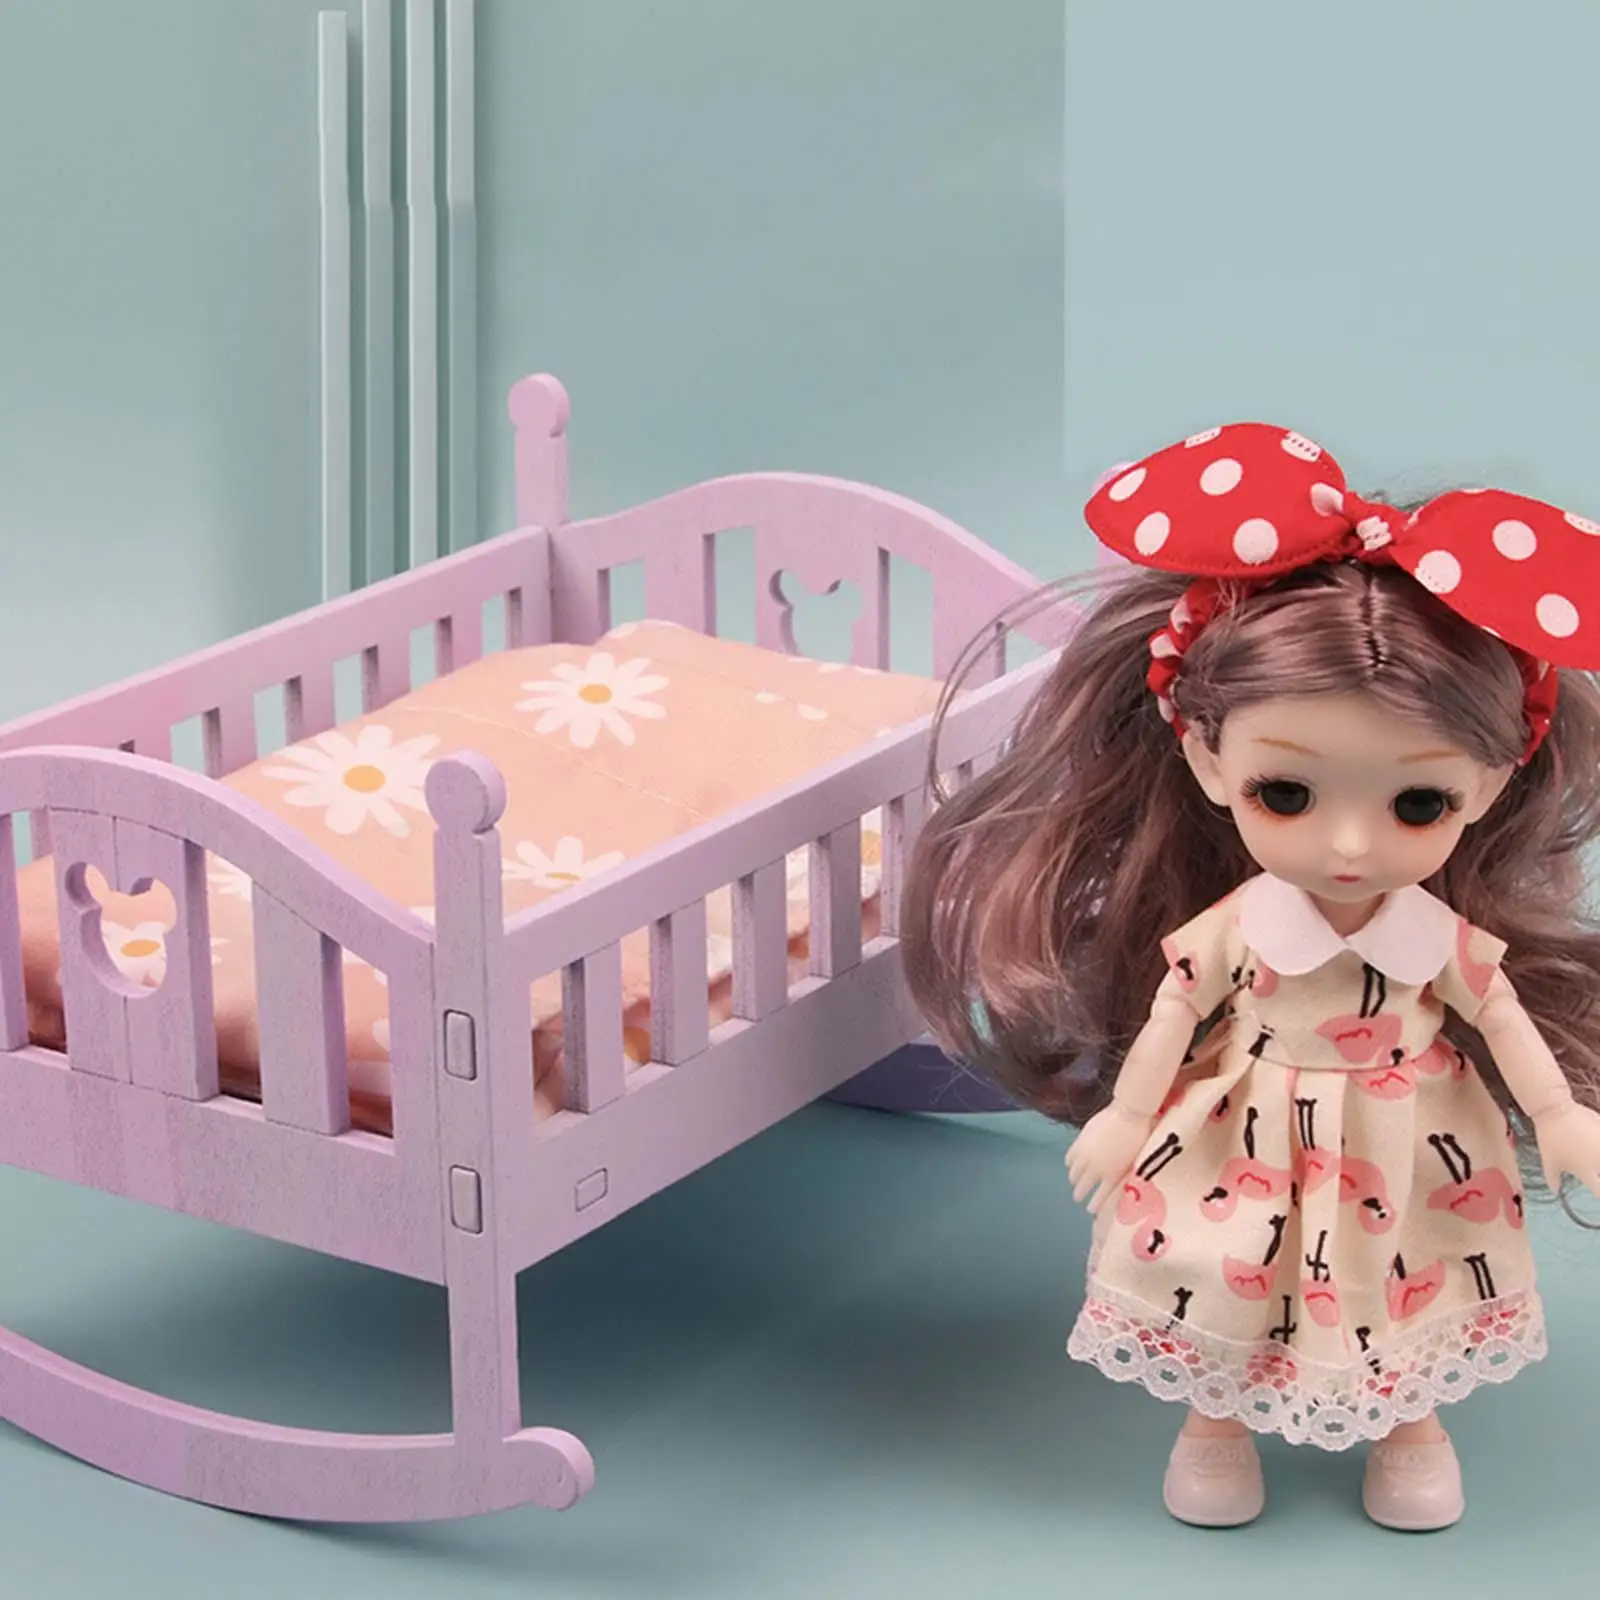 Doll Toys Makeup Smooth Hair with Doll Bed Dressup Cute for Birthday Gift